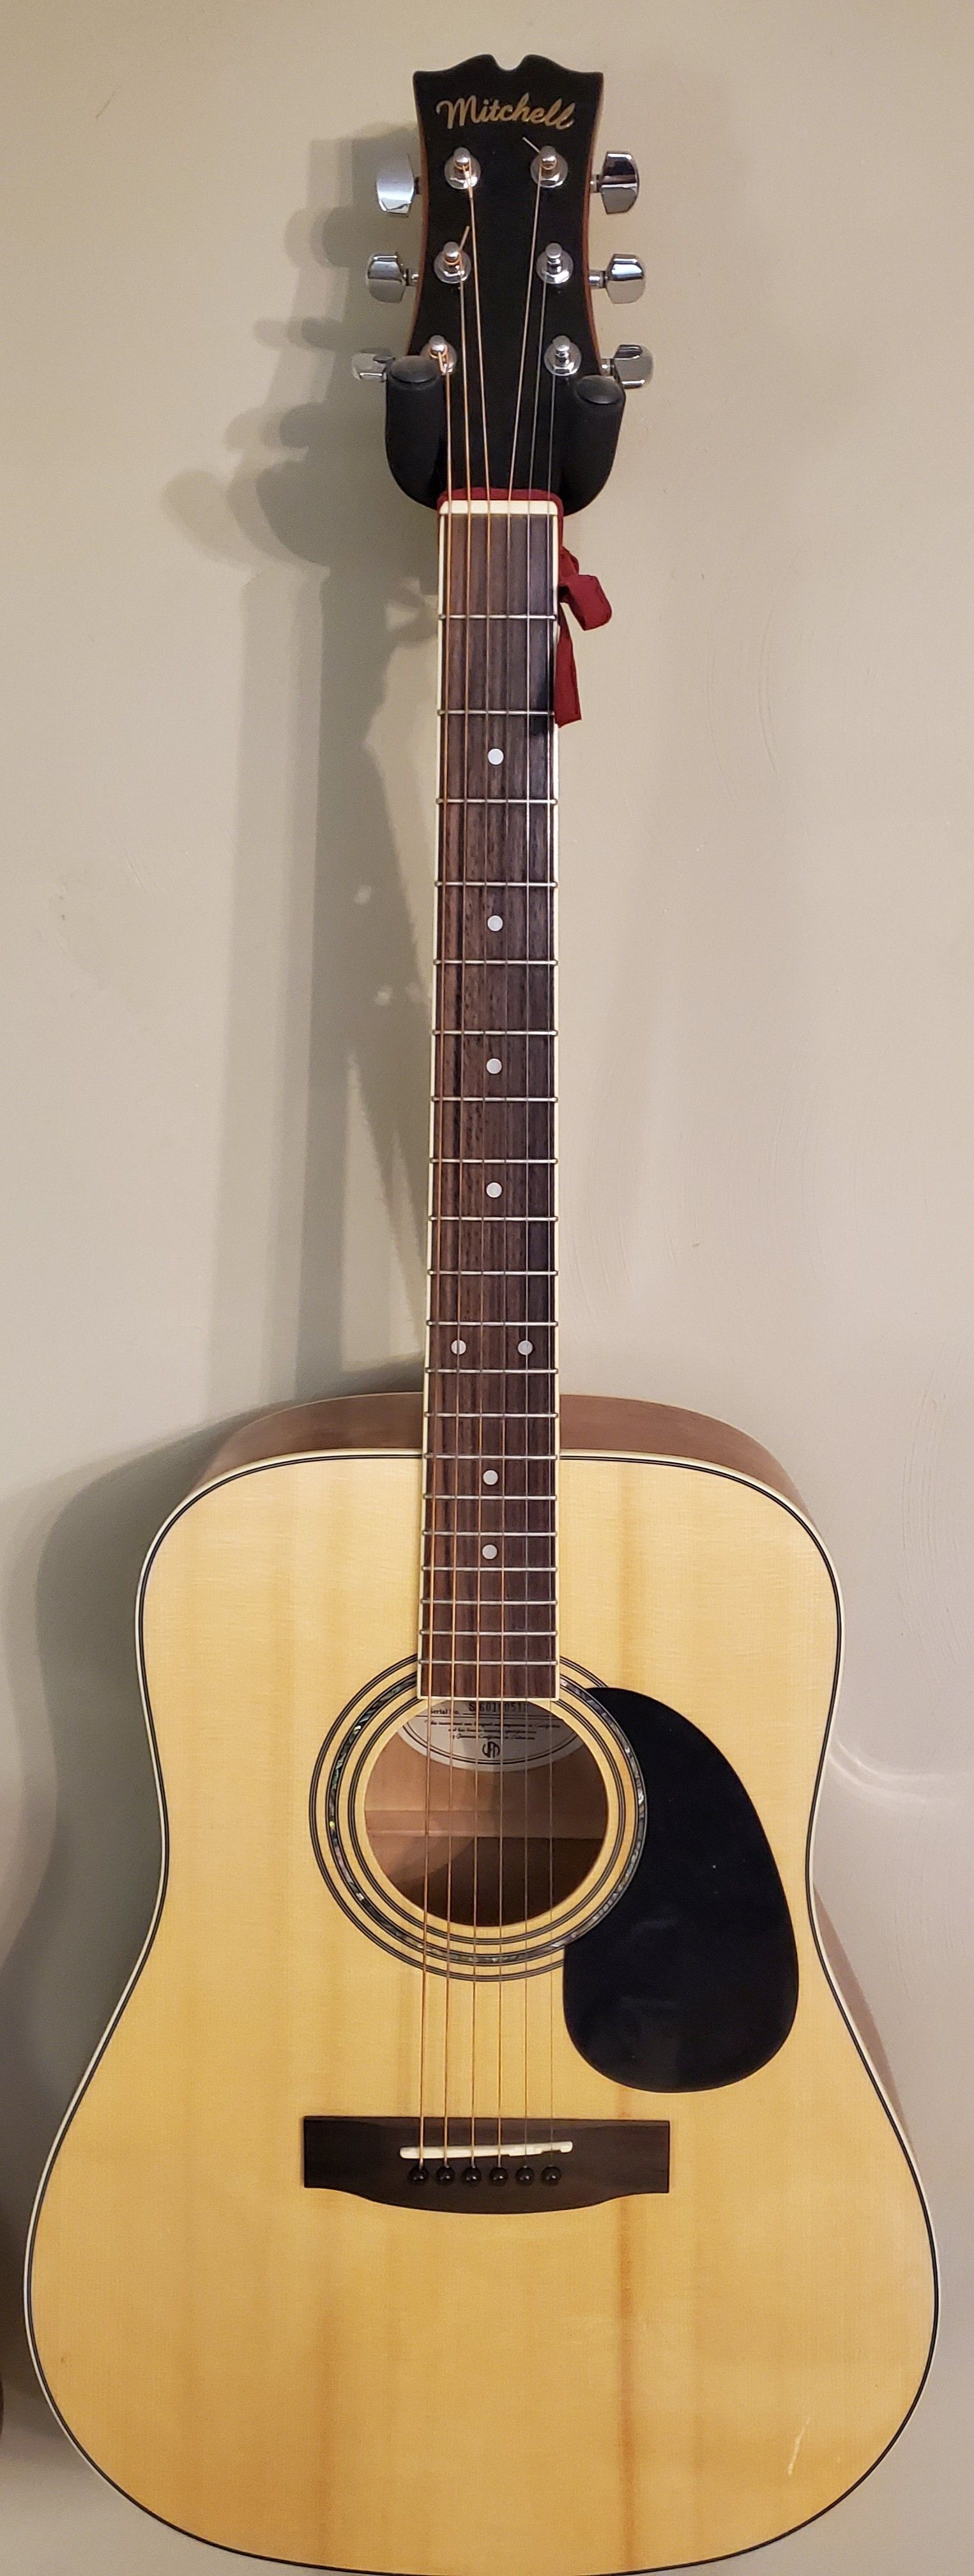 Mitchell MD-100S acoustic guitar with mother-of-pearl inlay